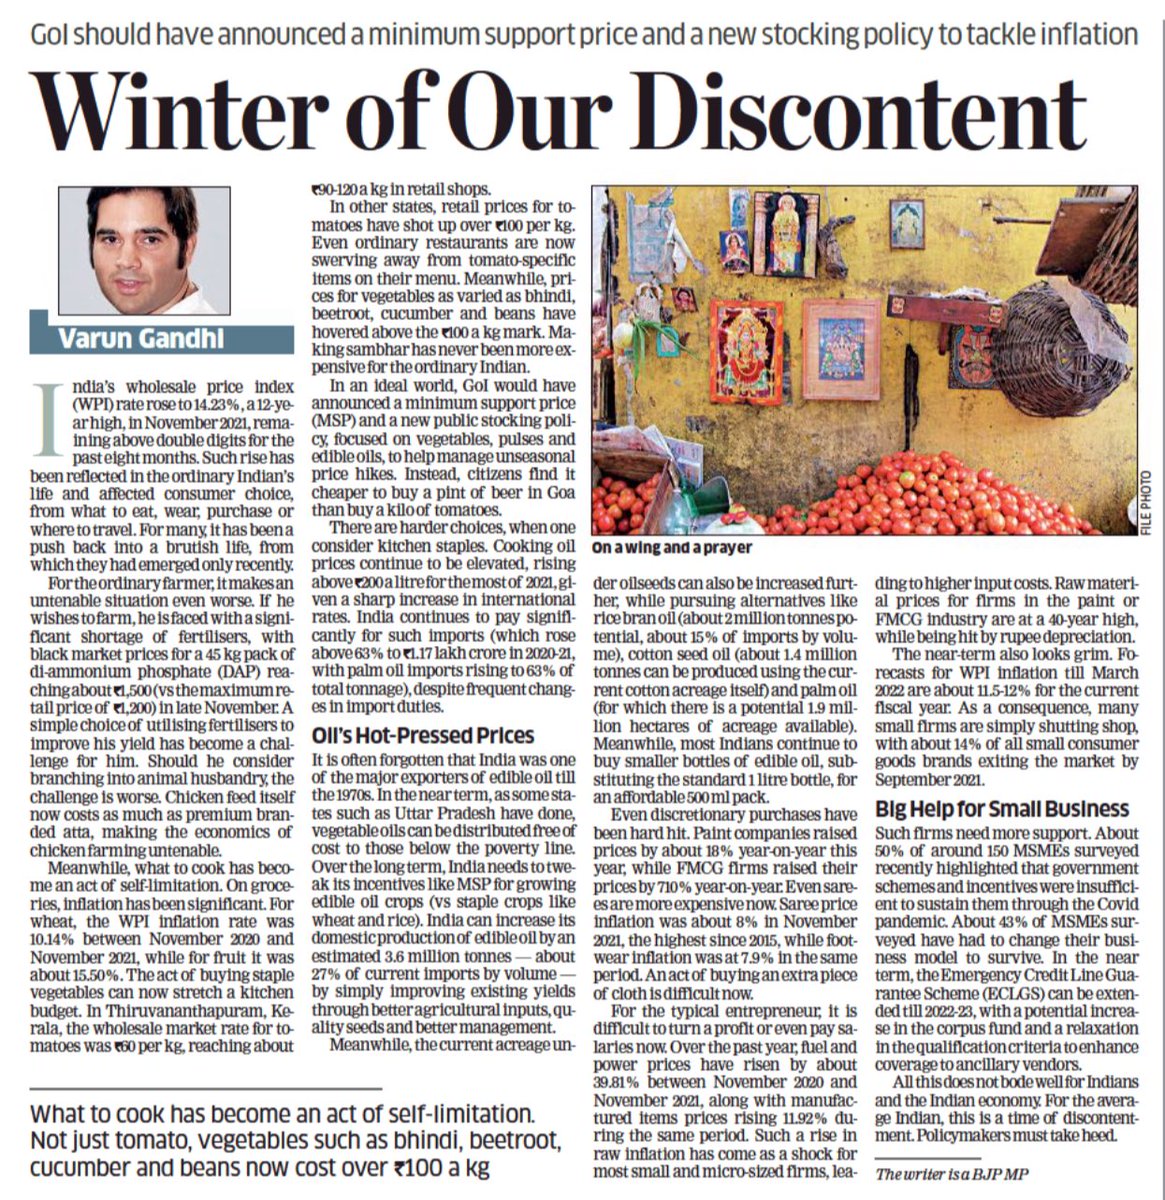 Inflation has ravaged the life of the ordinary Indian, limiting choices. This is now a winter of discontent. Policymakers should take heed. m.economictimes.com/opinion/et-com…